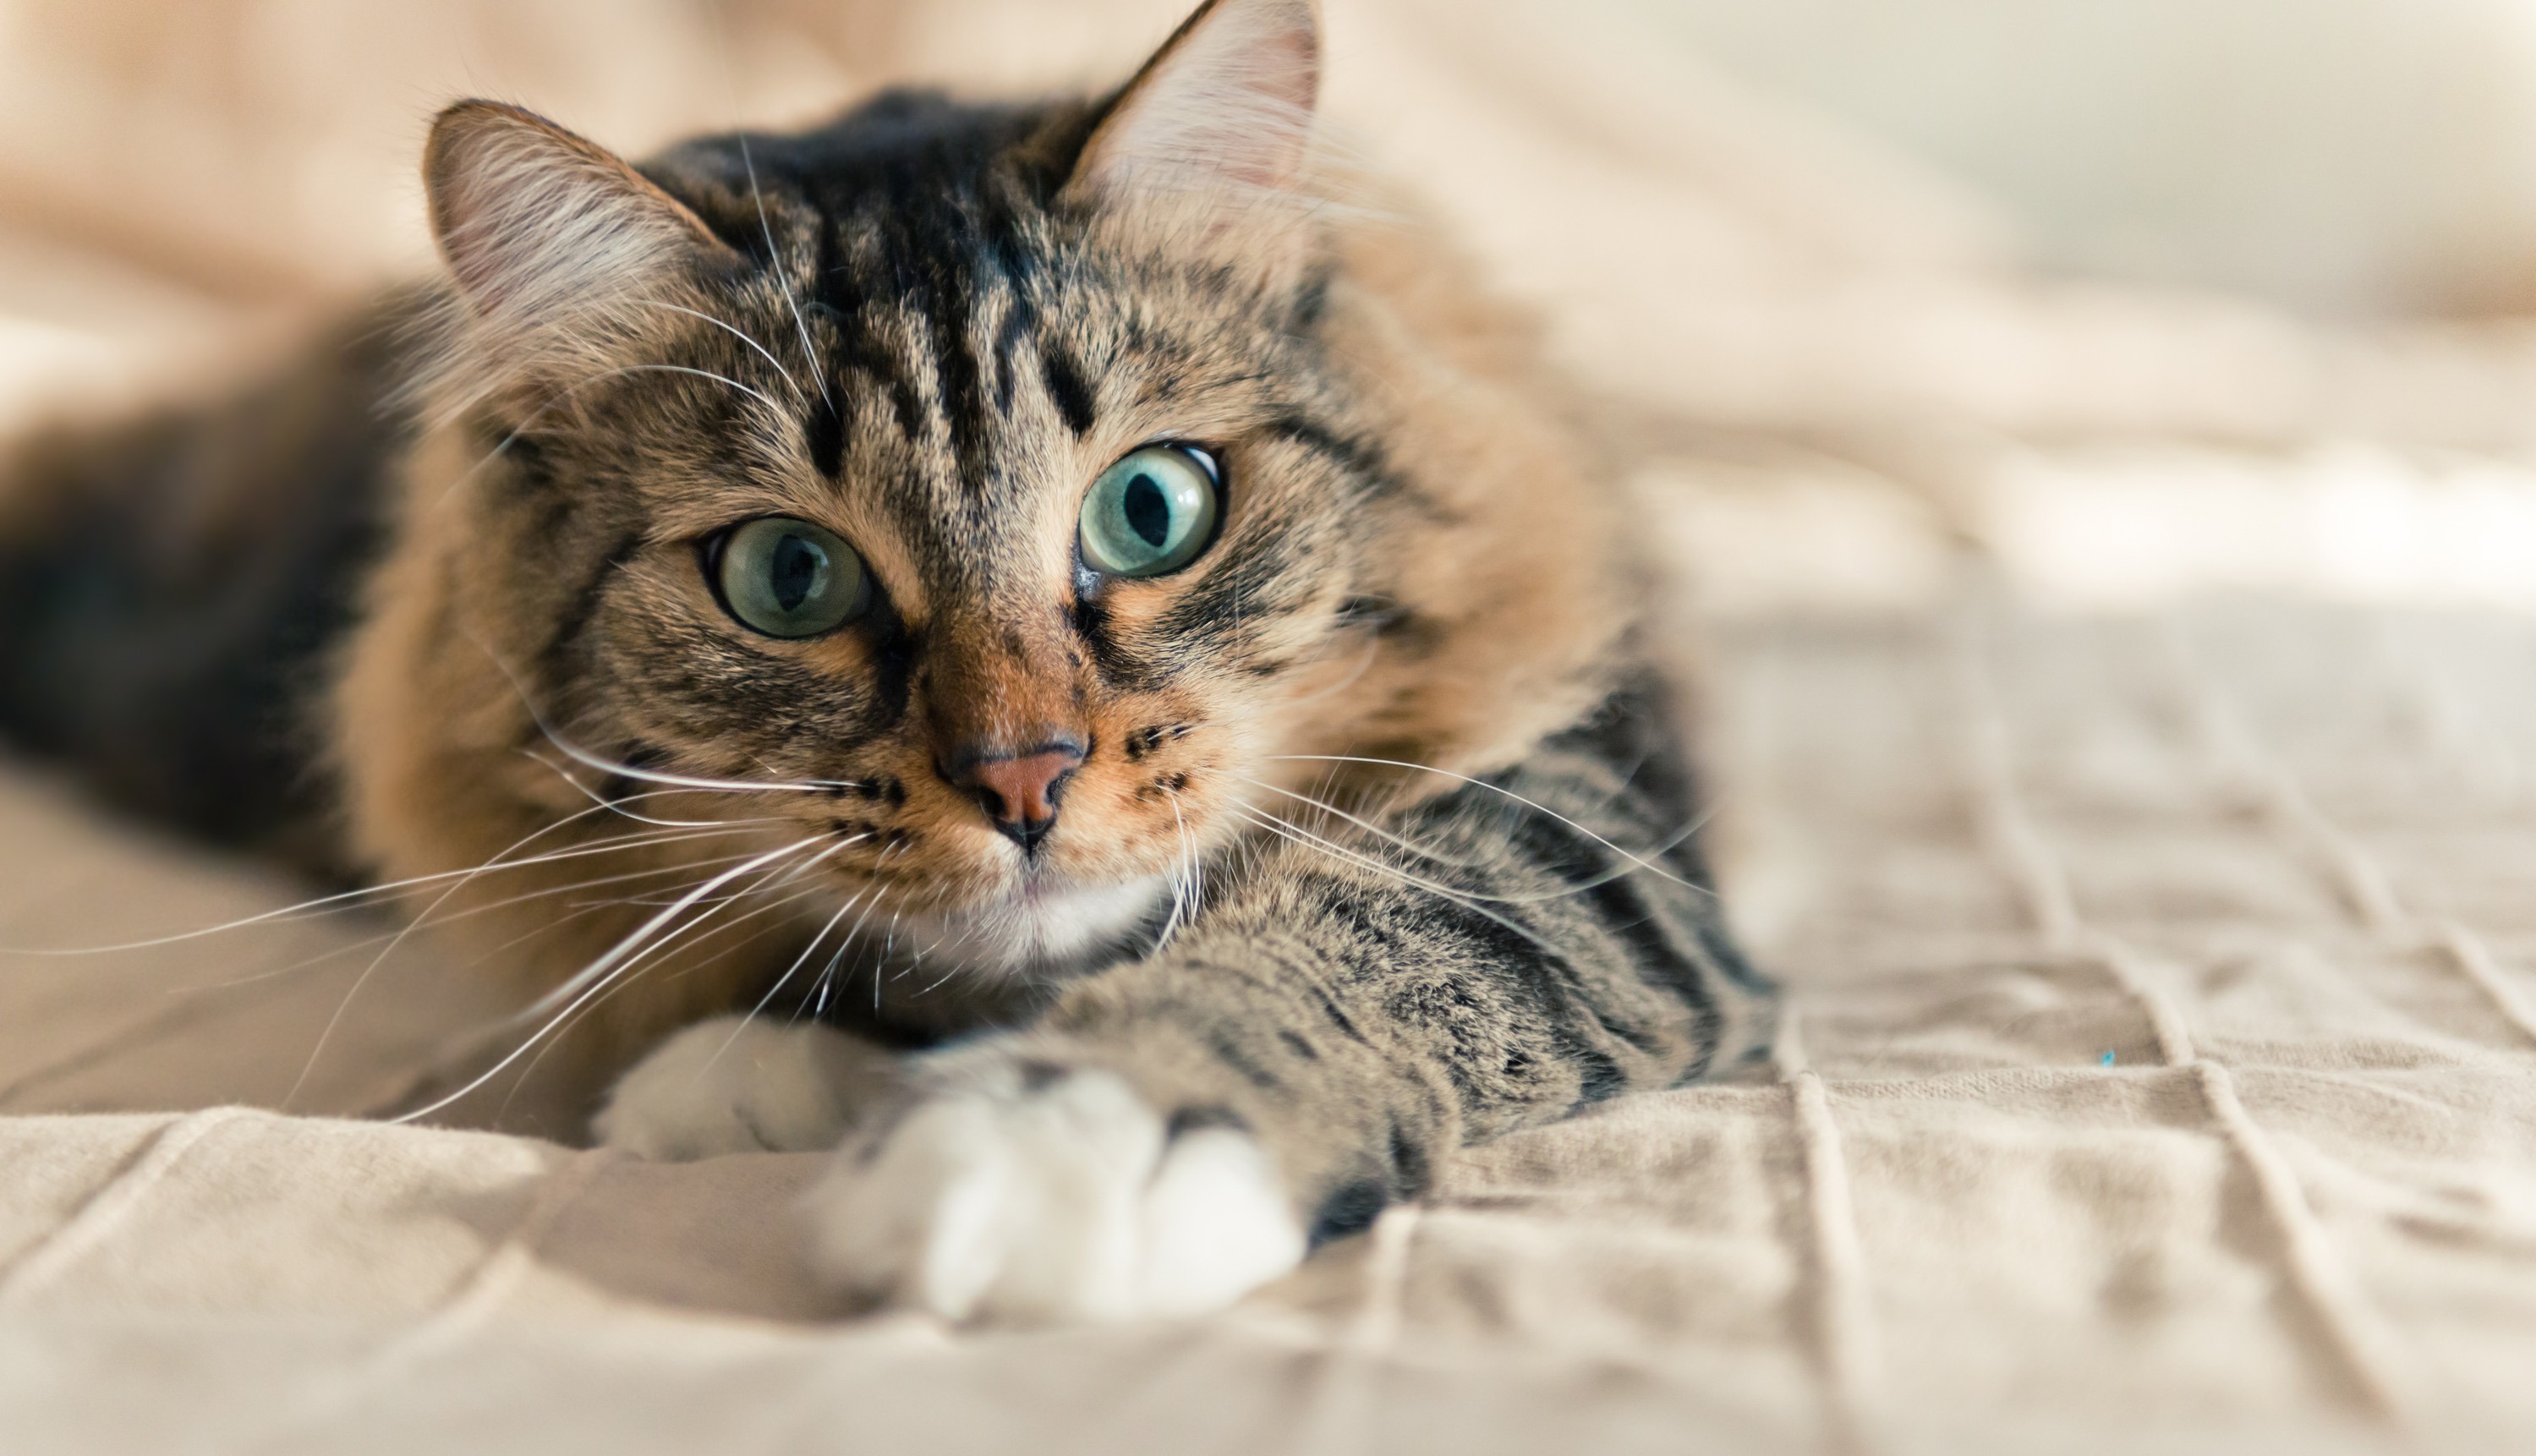 5 Small Apartment Pets That Are Easy to Care For Cover Photo